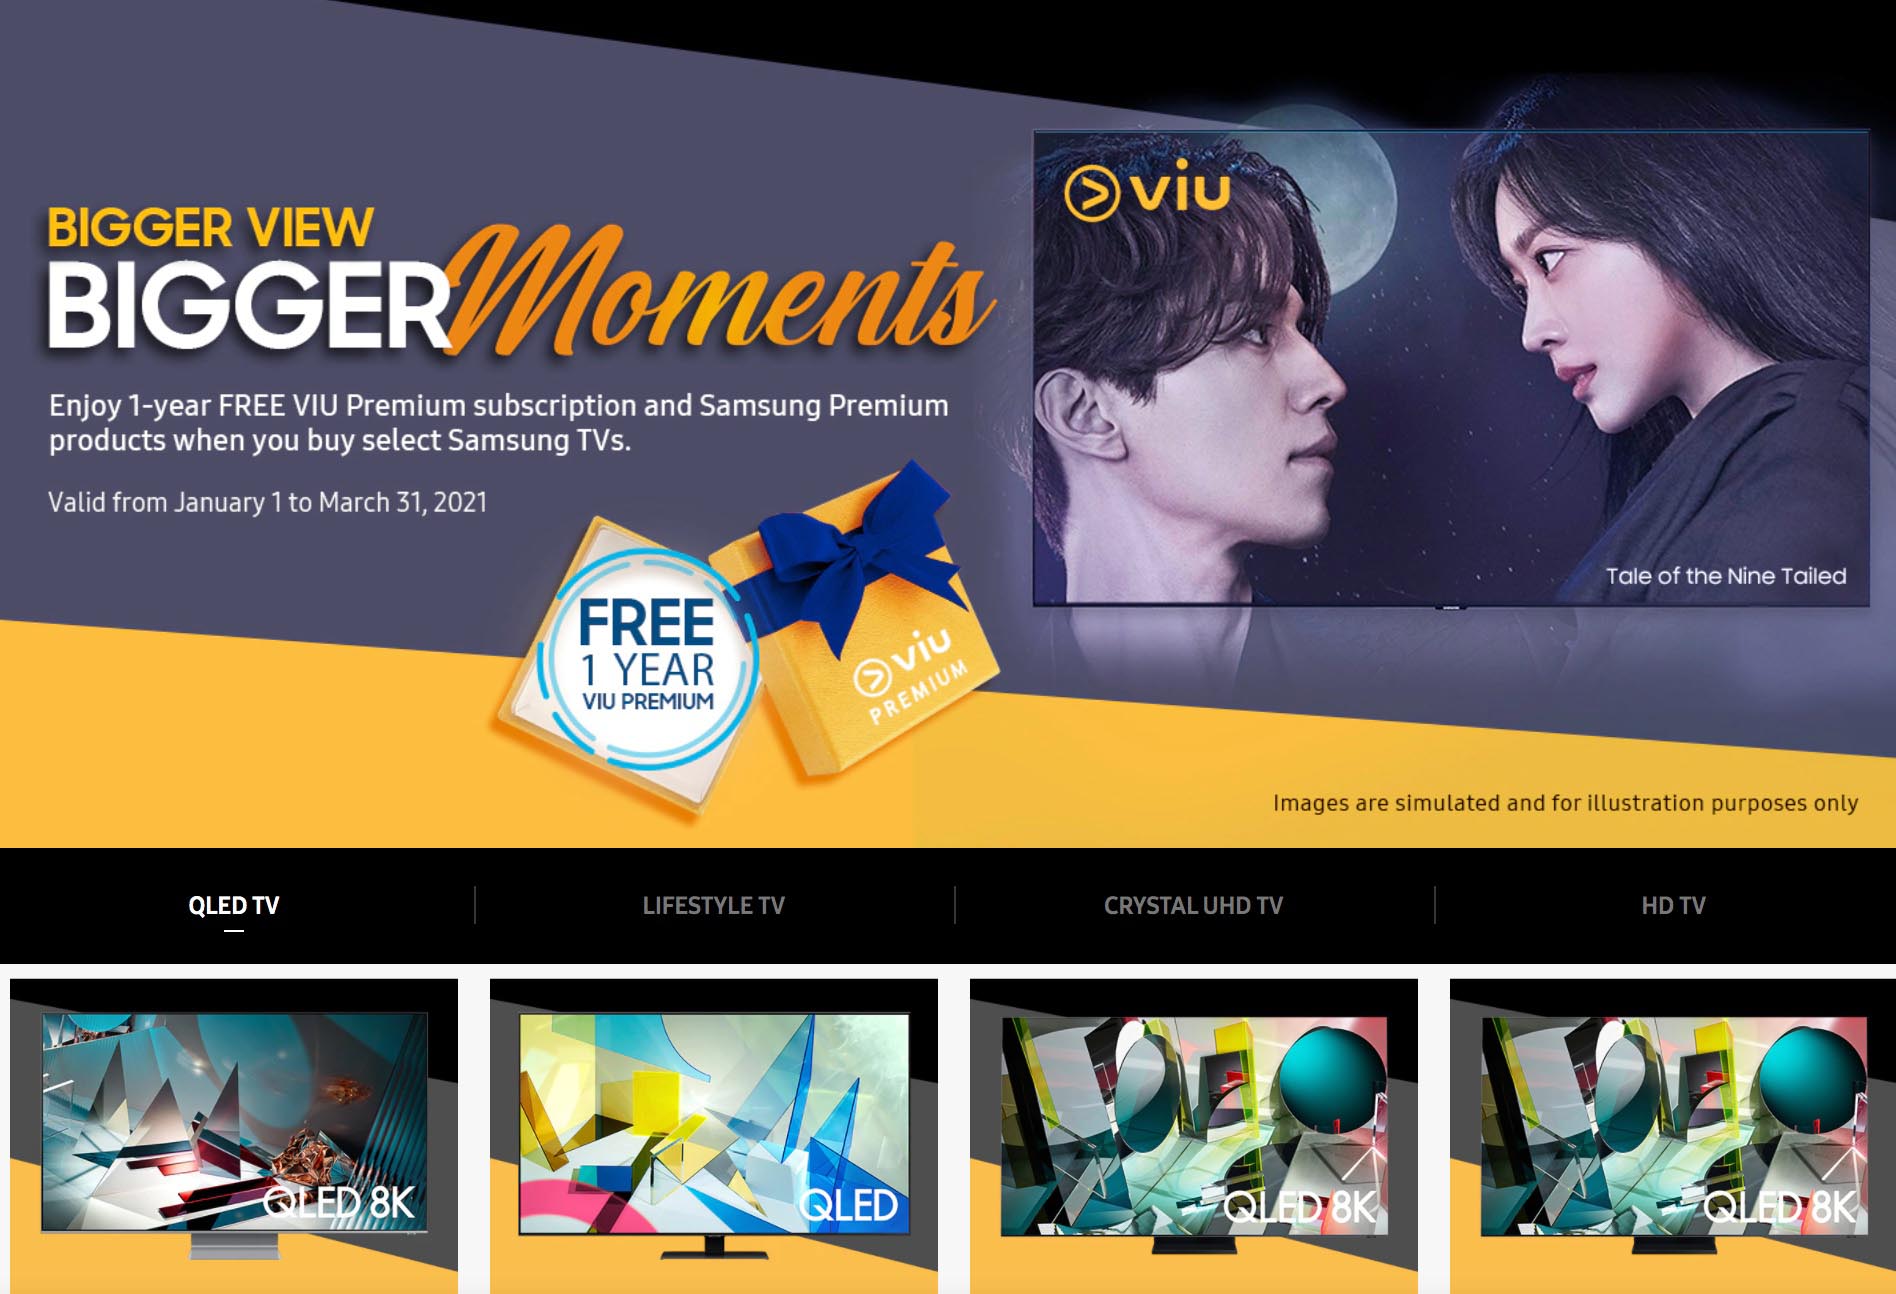 Catch these new thriller K-dramas on Viu best viewed on a Samsung Smart TV